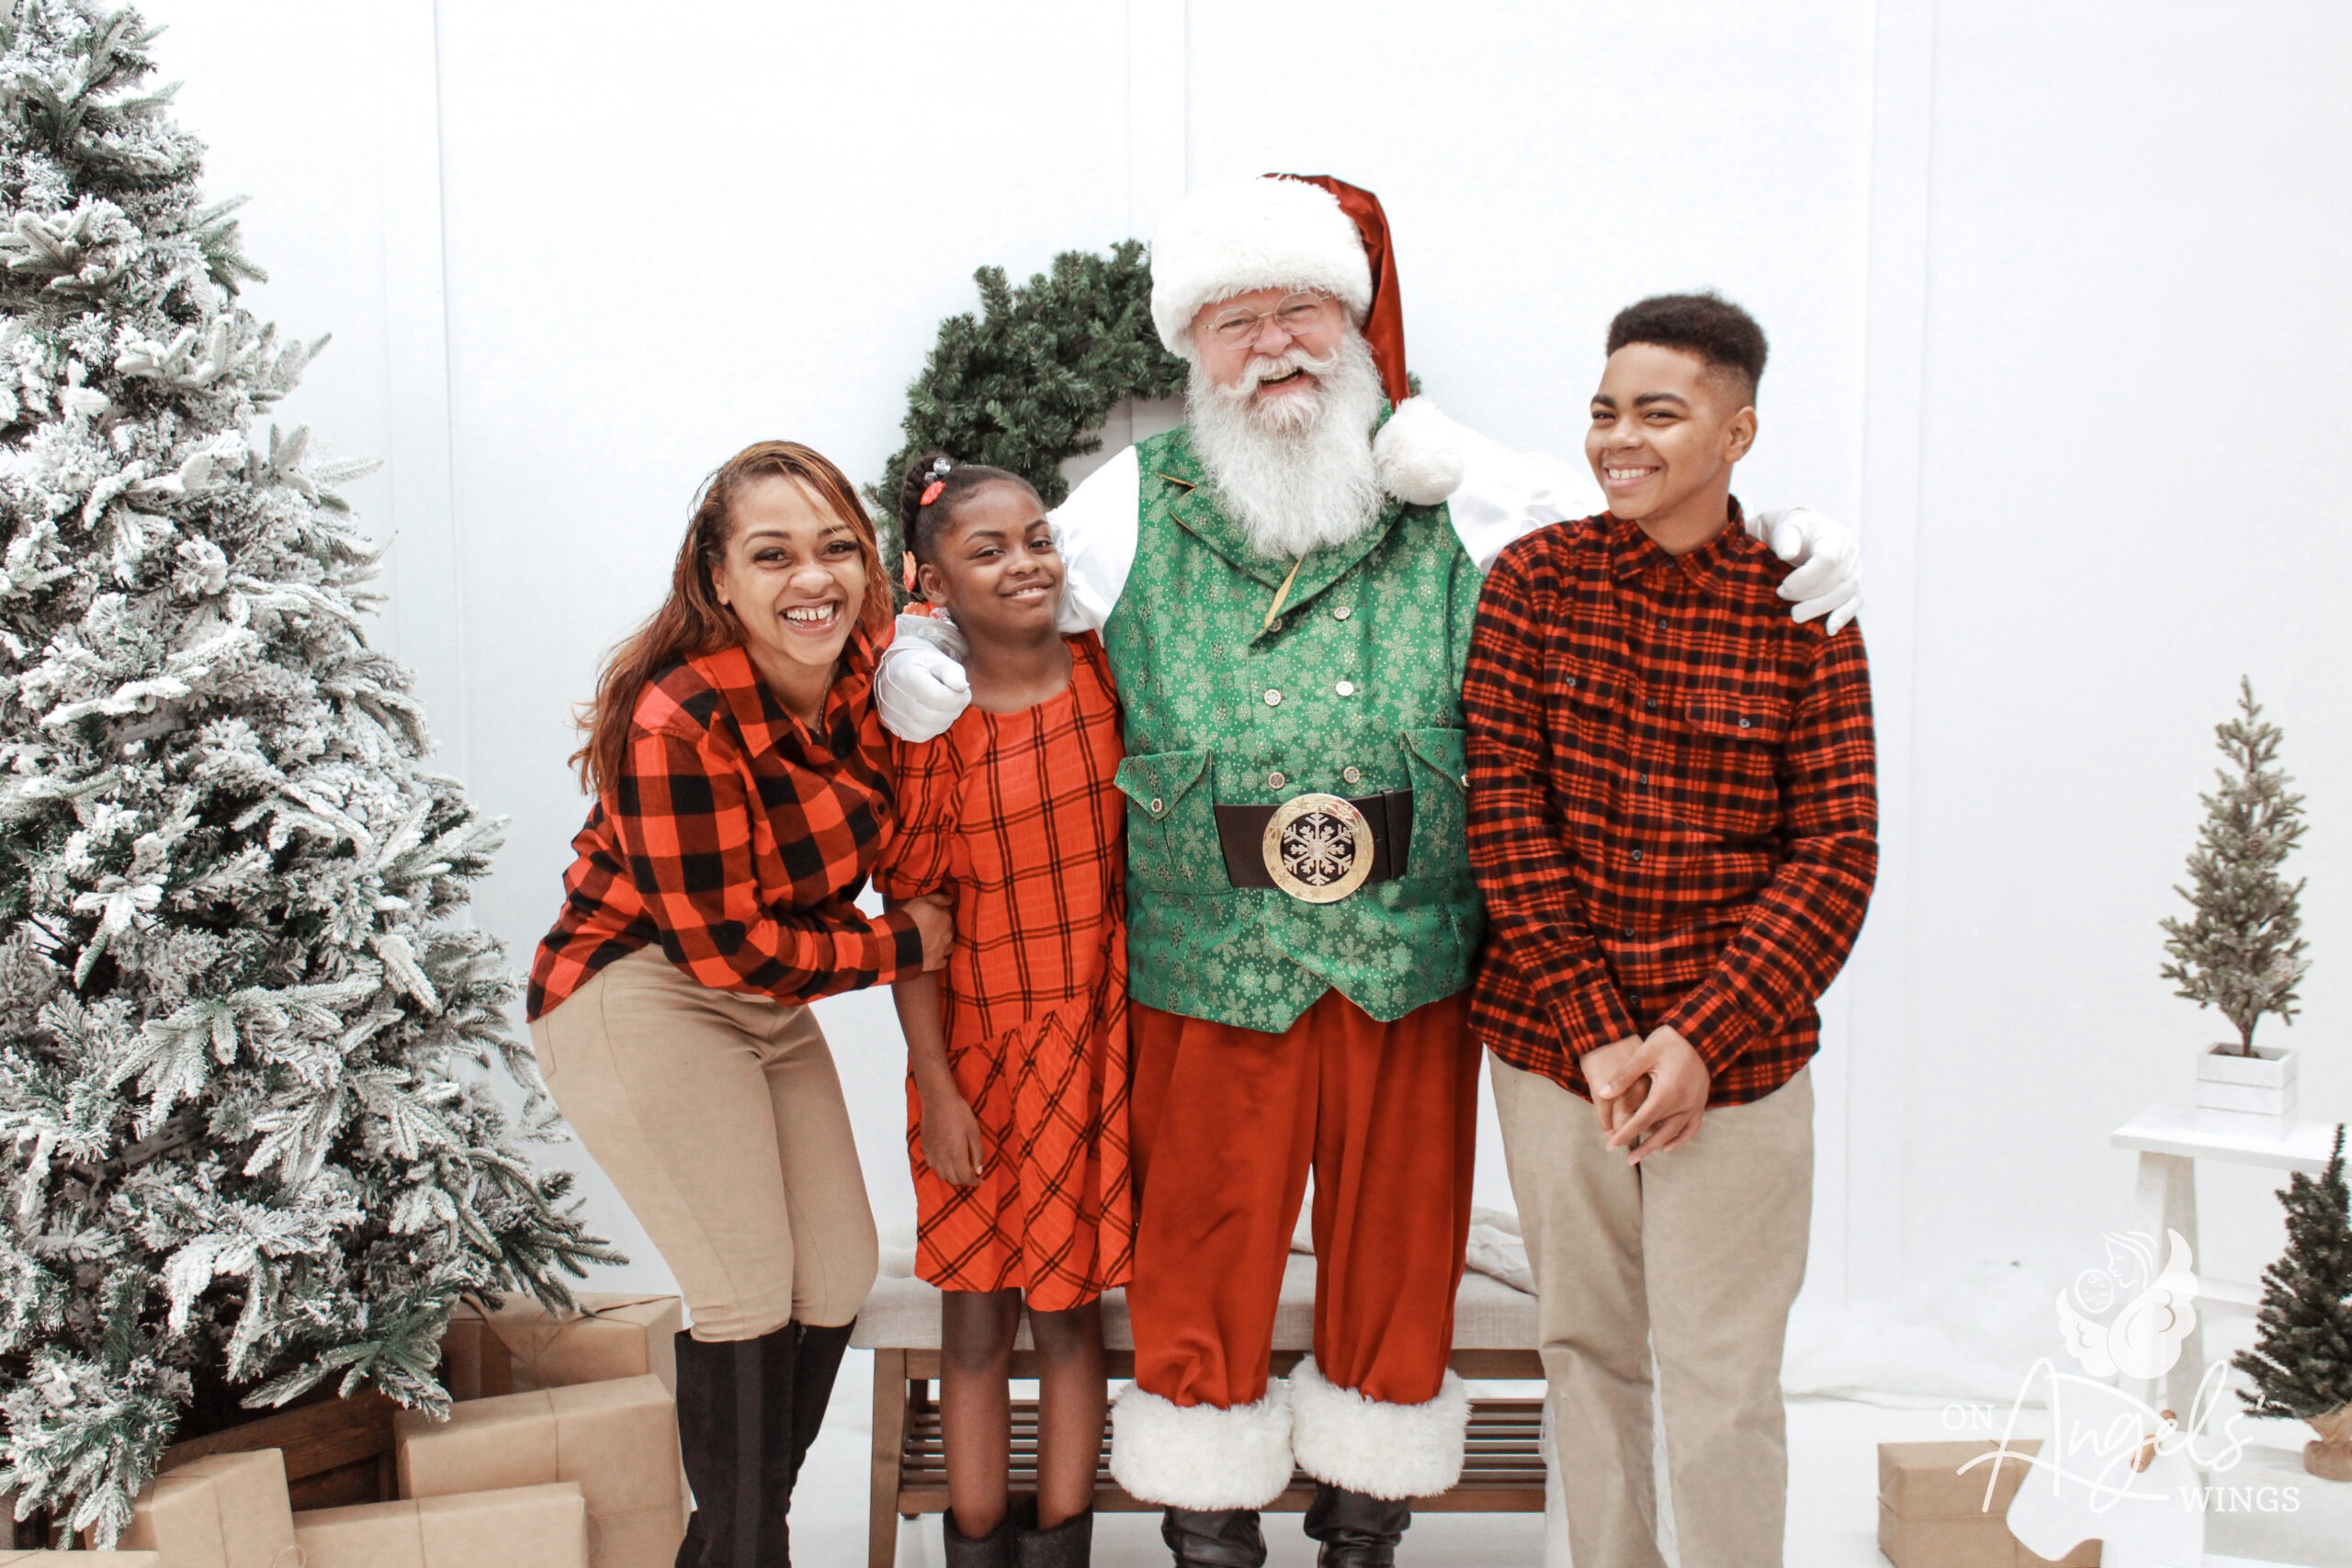 OAW Recipients in St. Louis Receive Free Santa Pictures